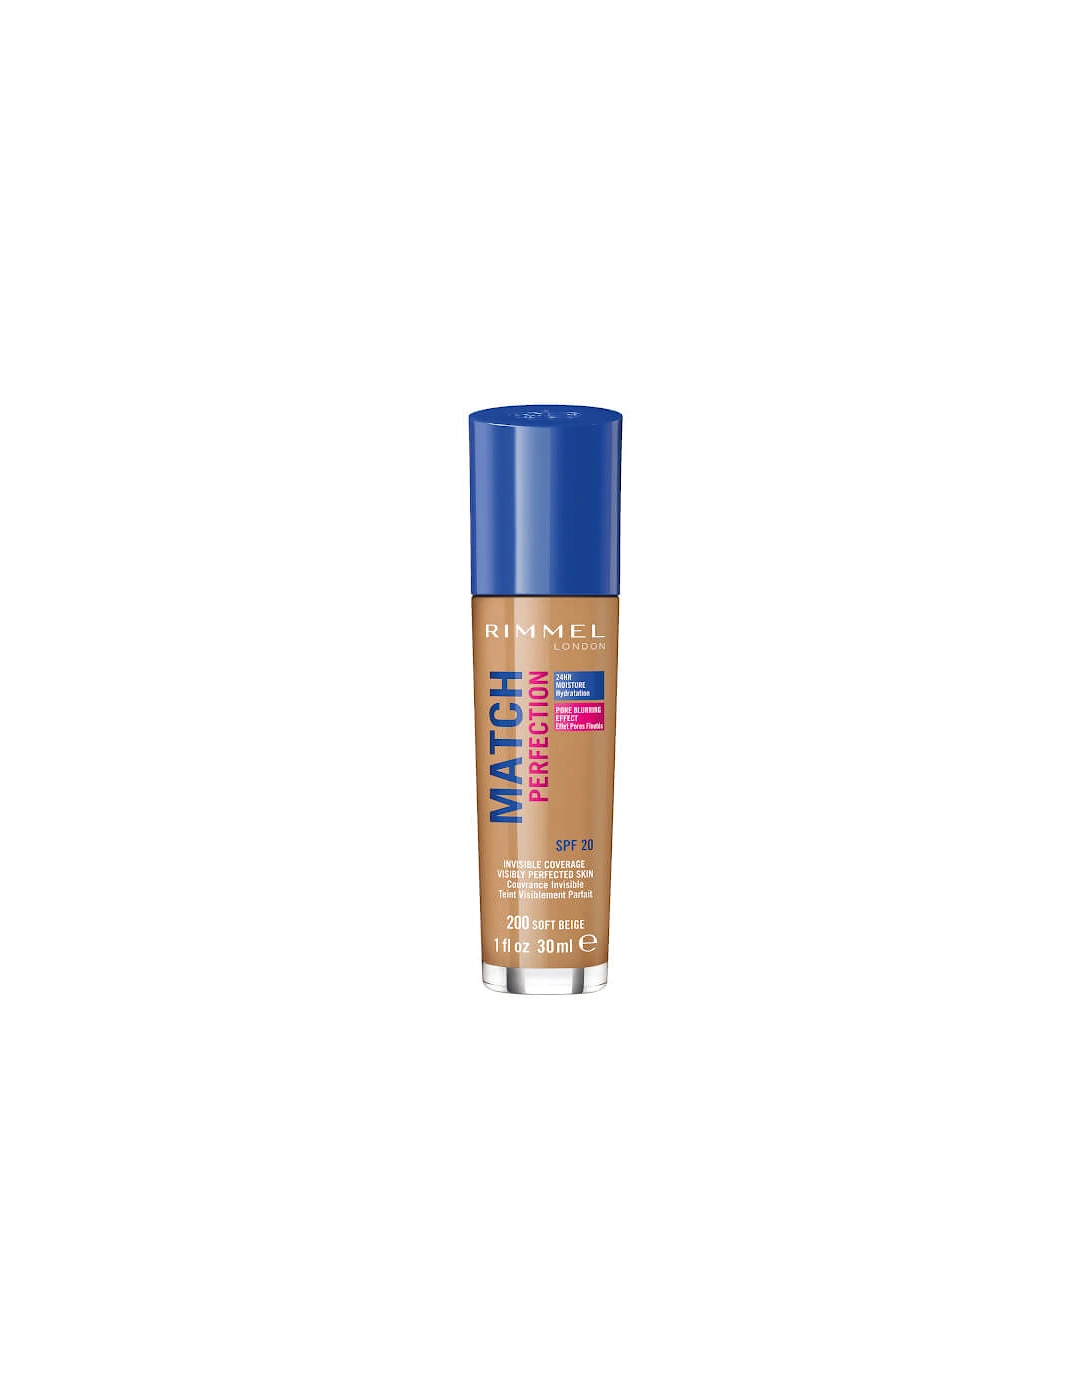 London SPF 20 Match Perfection Foundation - Soft Beige, 2 of 1